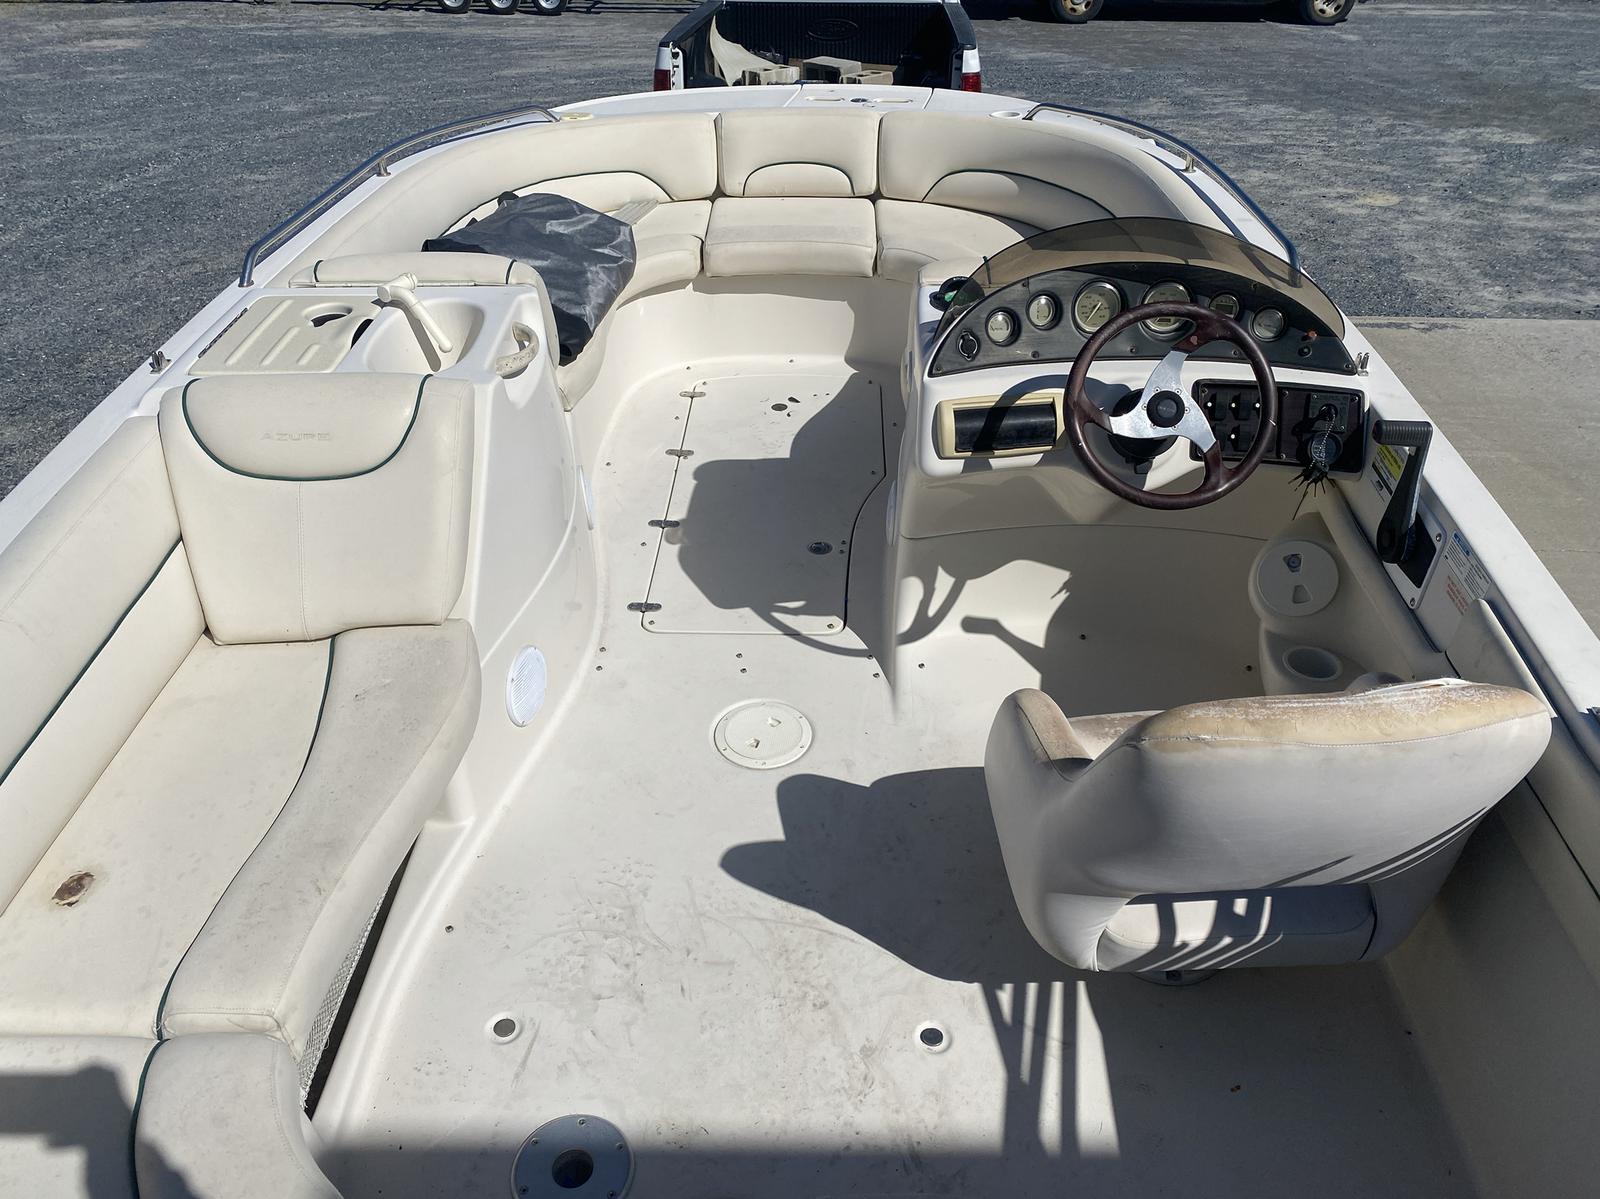 2005 Azure boat for sale, model of the boat is AZ210 & Image # 4 of 13